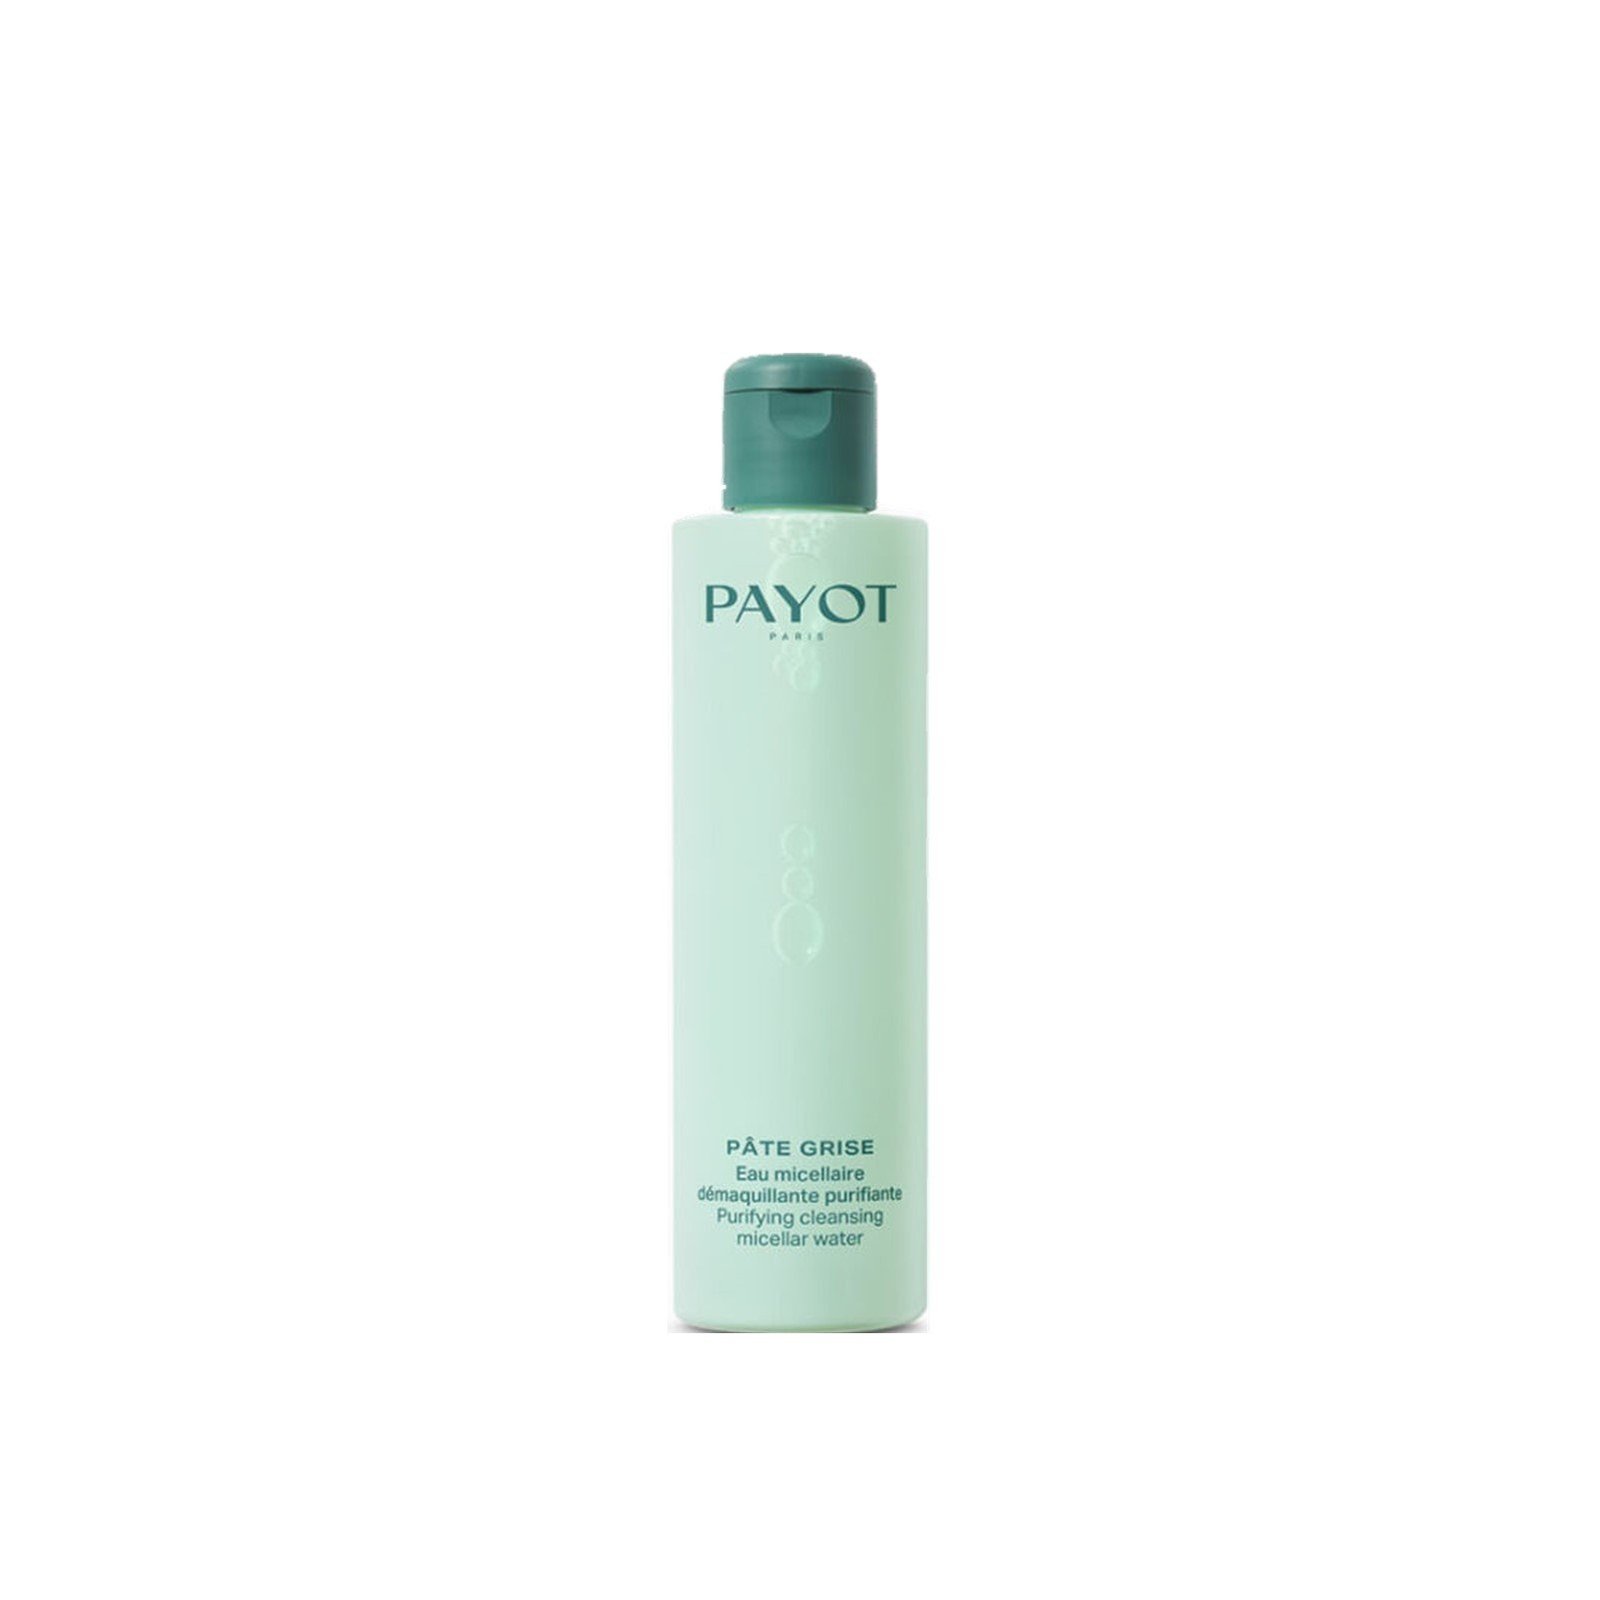 Payot Pâte Grise Purifying Cleansing Micellar Water 200ml (6.7 fl oz)